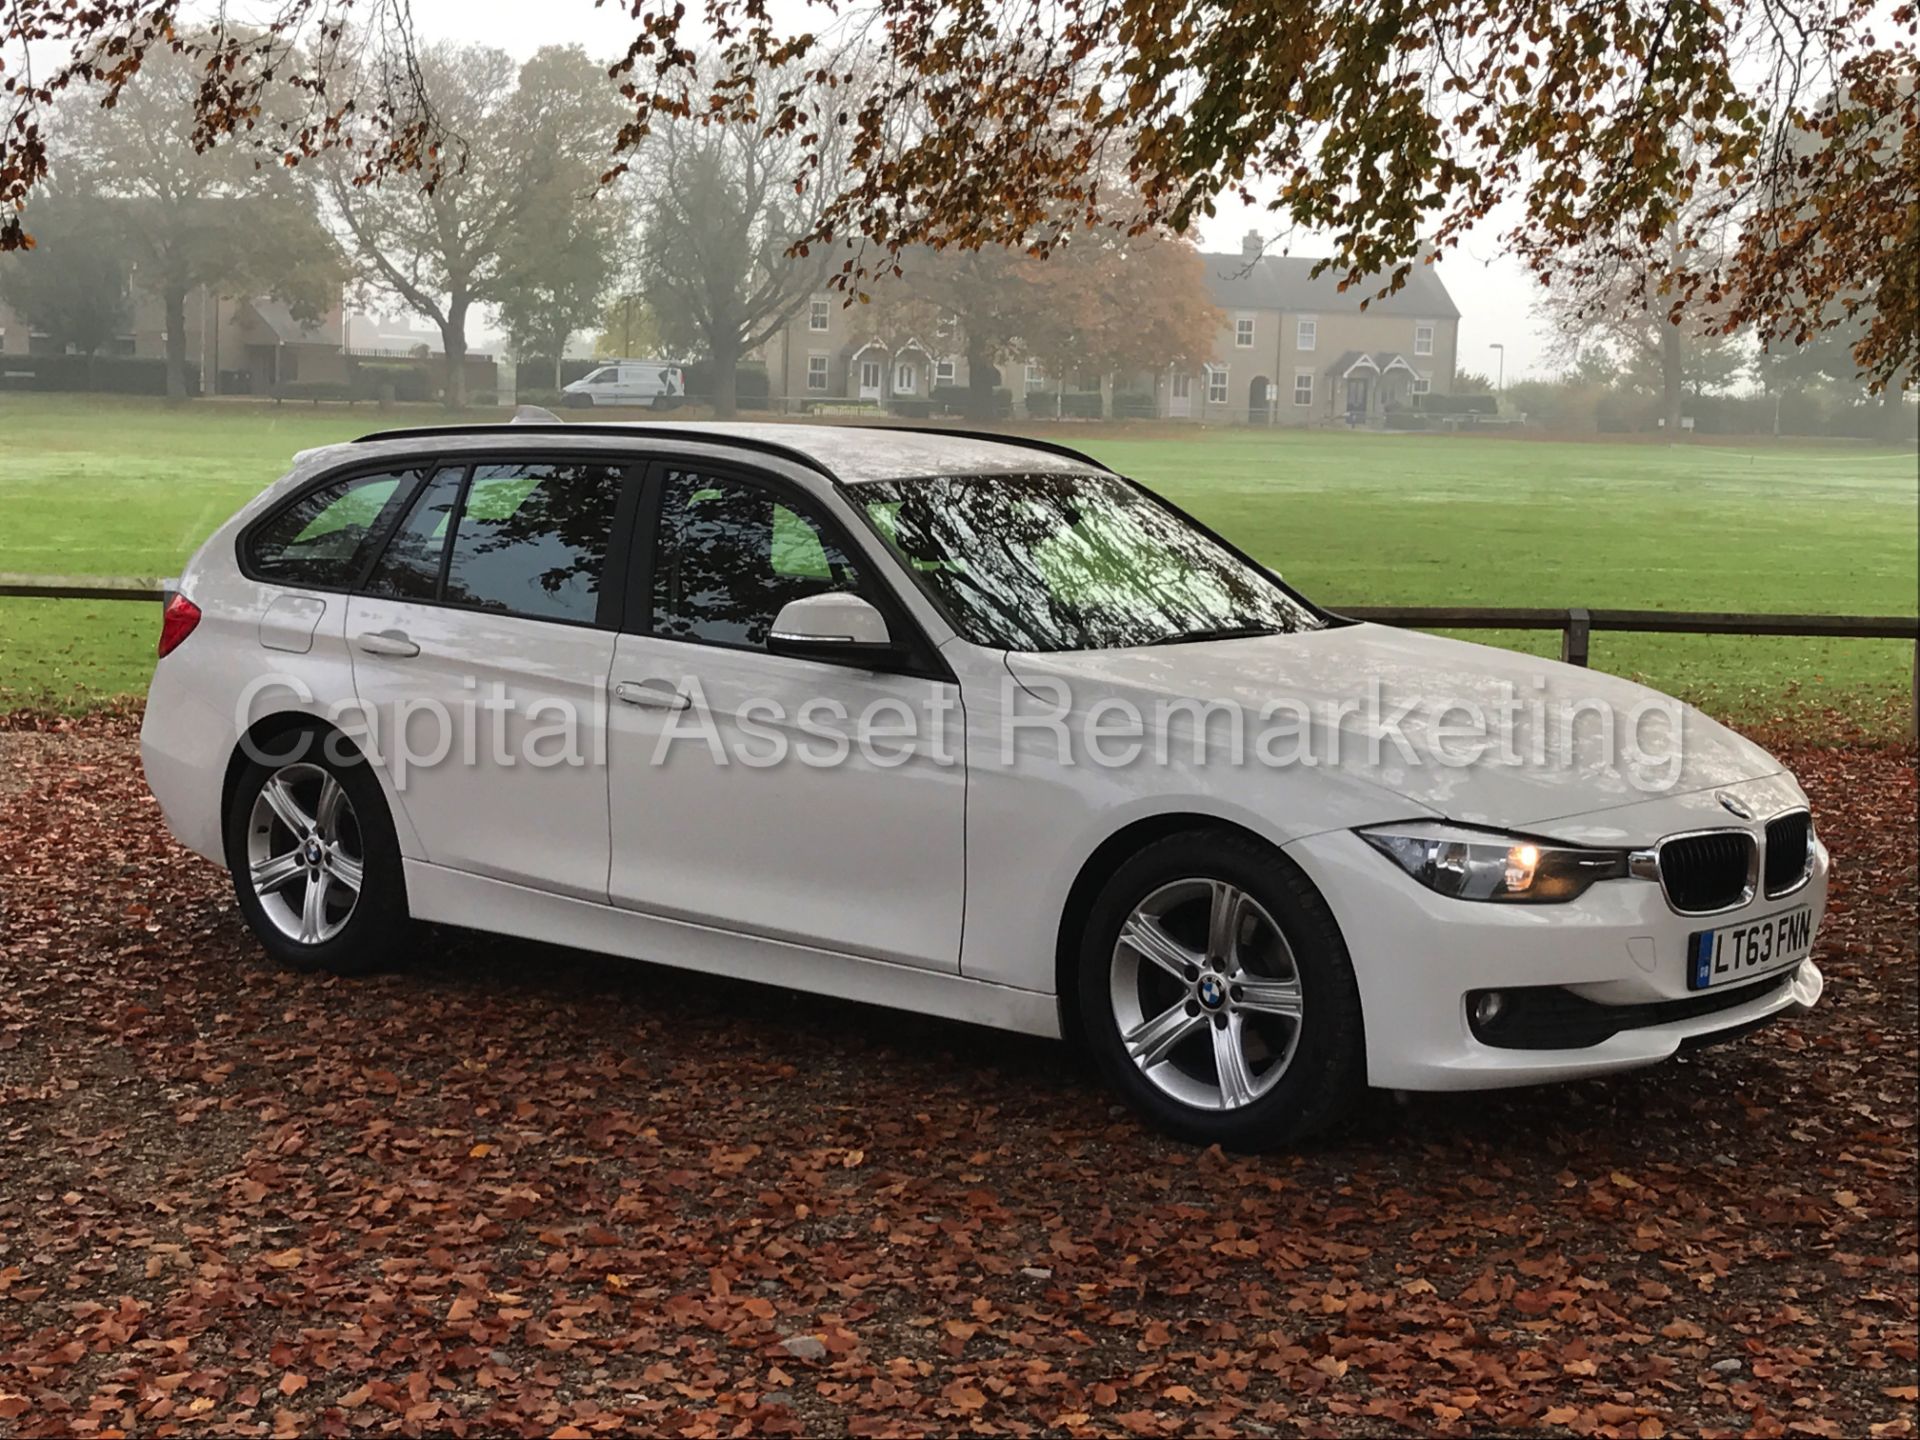 BMW 320d 'ESTATE / TOURING' (2014 MODEL) 8 SPEED AUTO - SAT NAV **FULLY LOADED** (1 OWNER FROM NEW) - Image 8 of 25